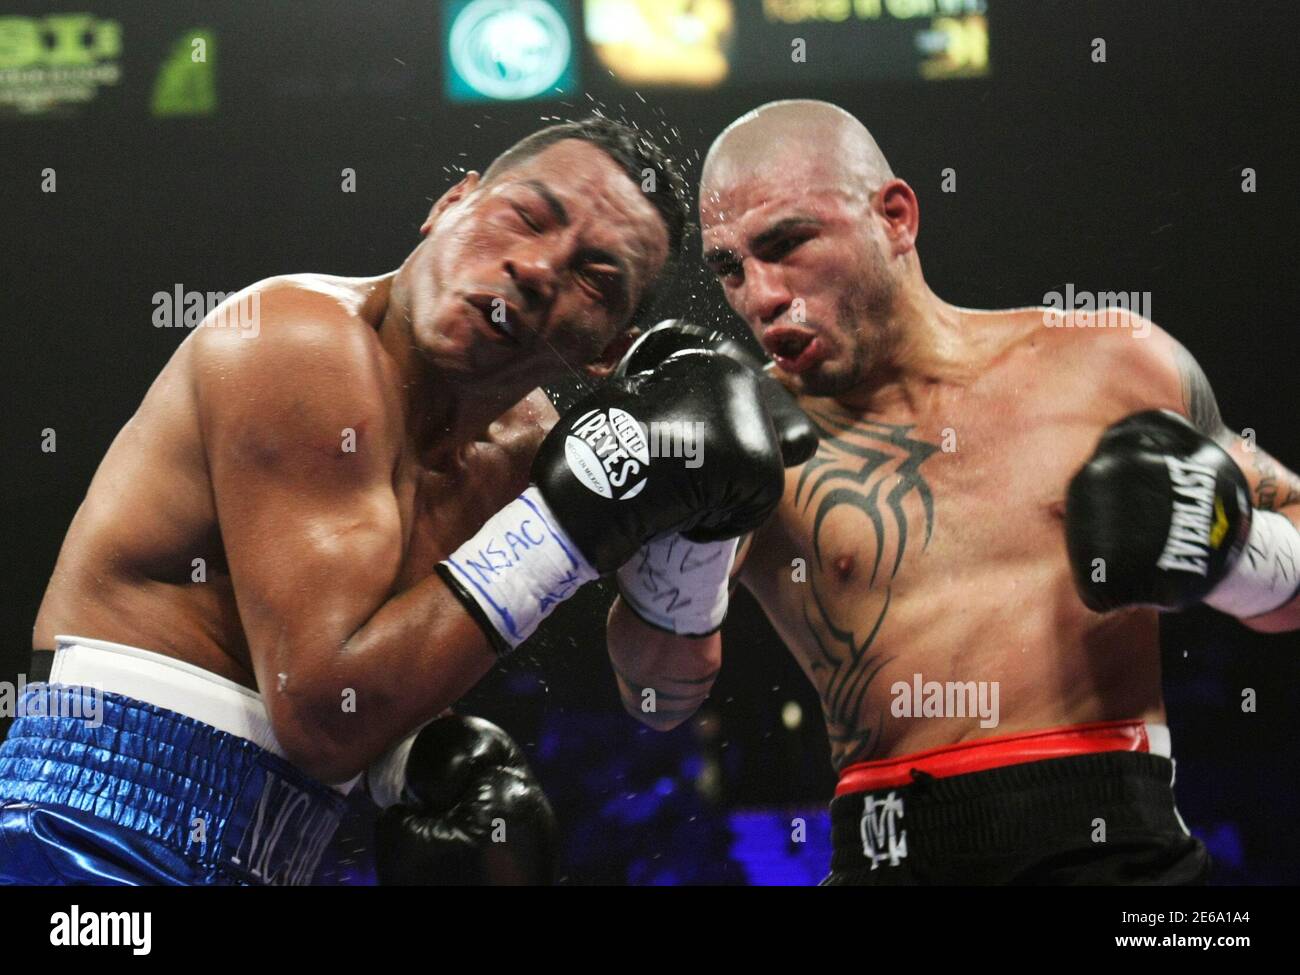 Ricardo Mayorga of Nicaragua (L) takes a punch from Miguel Cotto of Puerto  Rico during their WBA world super welterweight title fight at the MGM Grand  Garden Arena in Las Vegas, Nevada